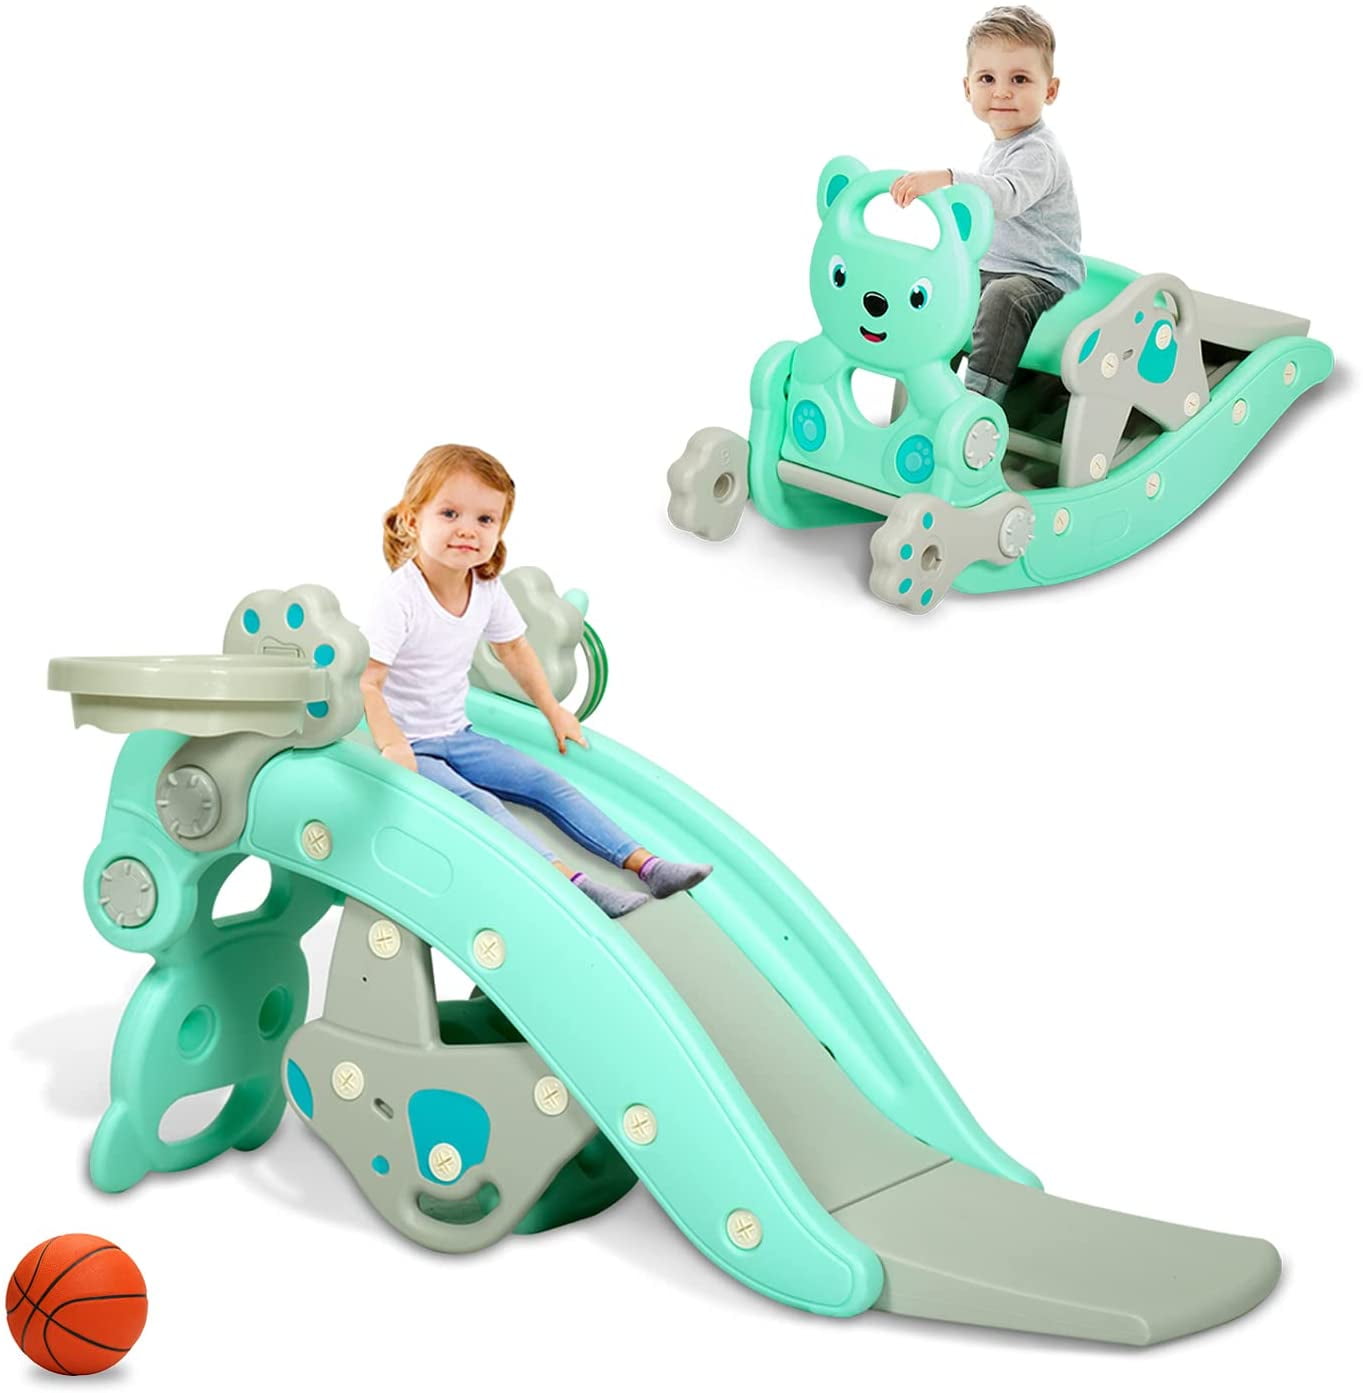 2-in-1 Child Climbing Slide And Rocking Horse For Indoor And Backyard Baskets 